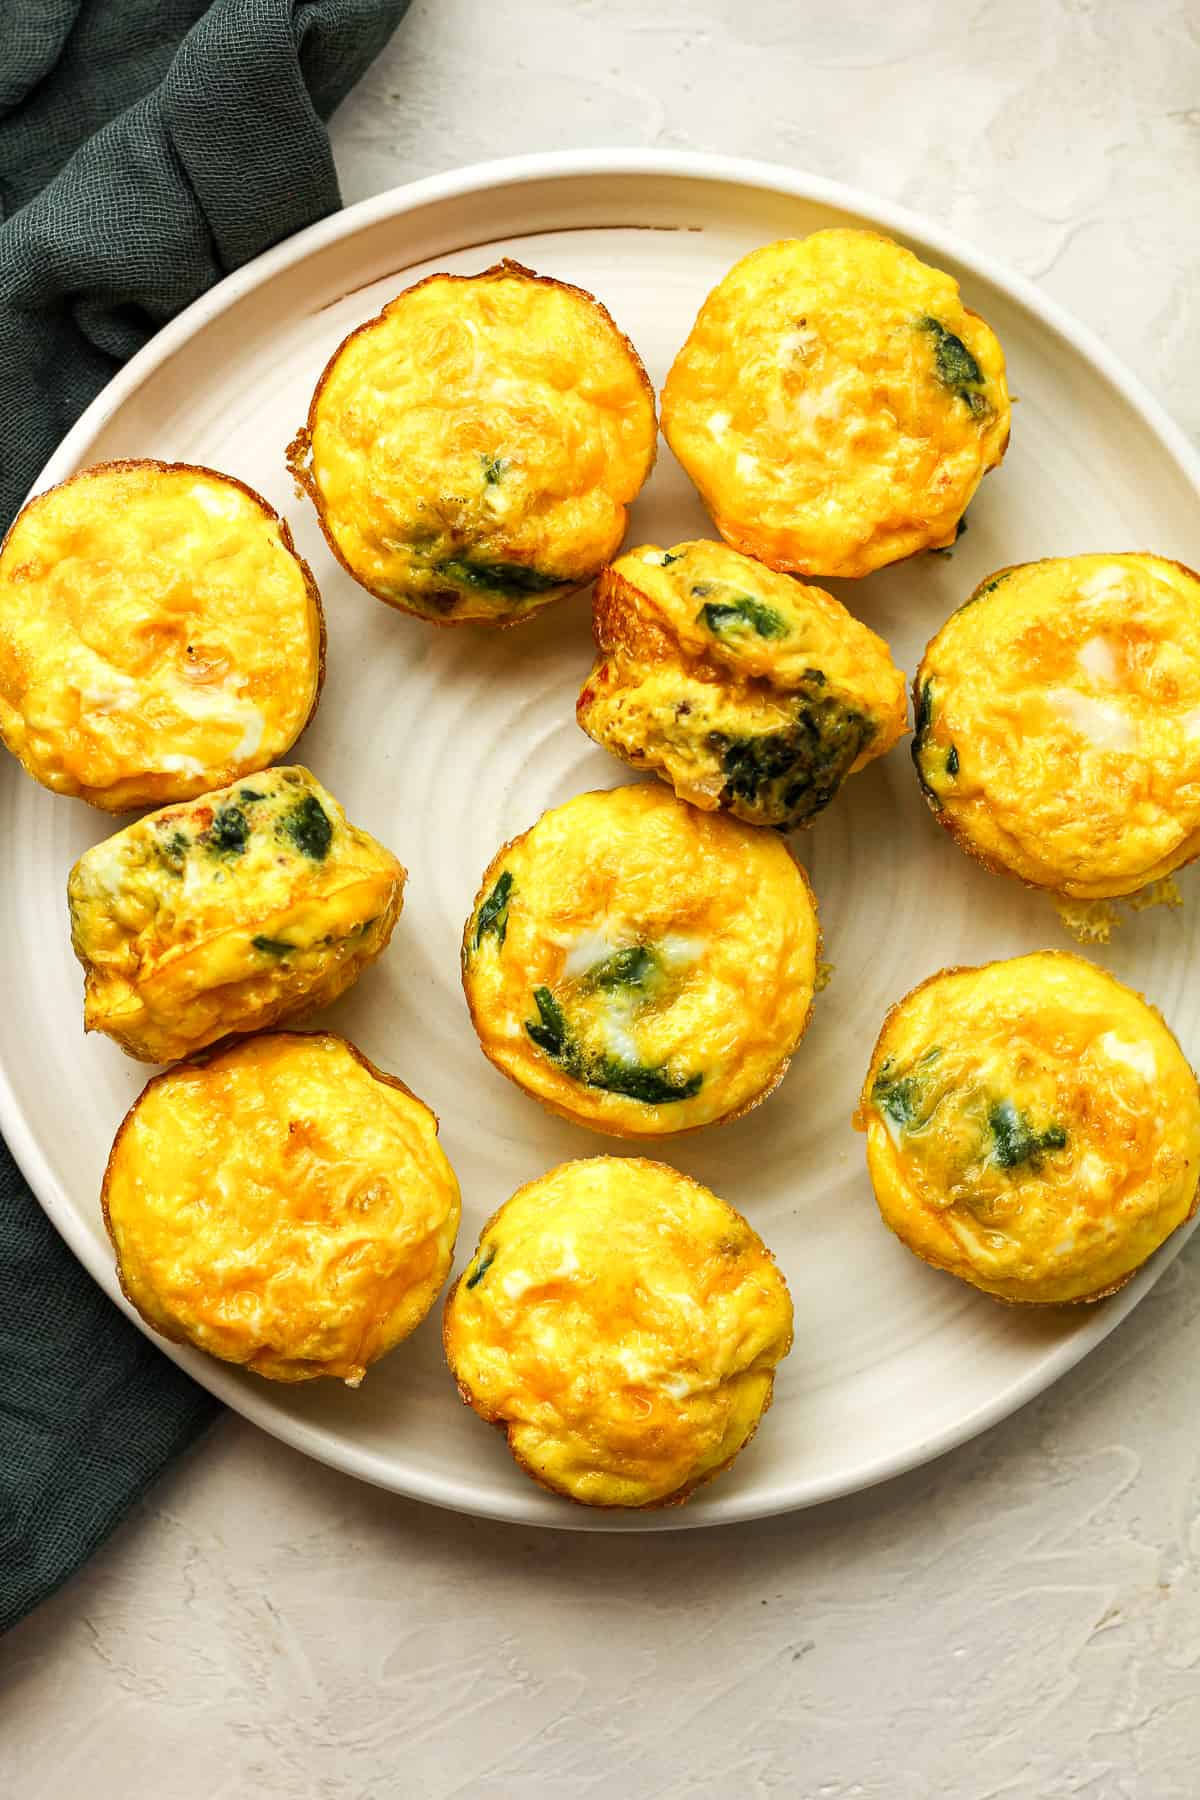 A large plate of sausage and egg muffins.